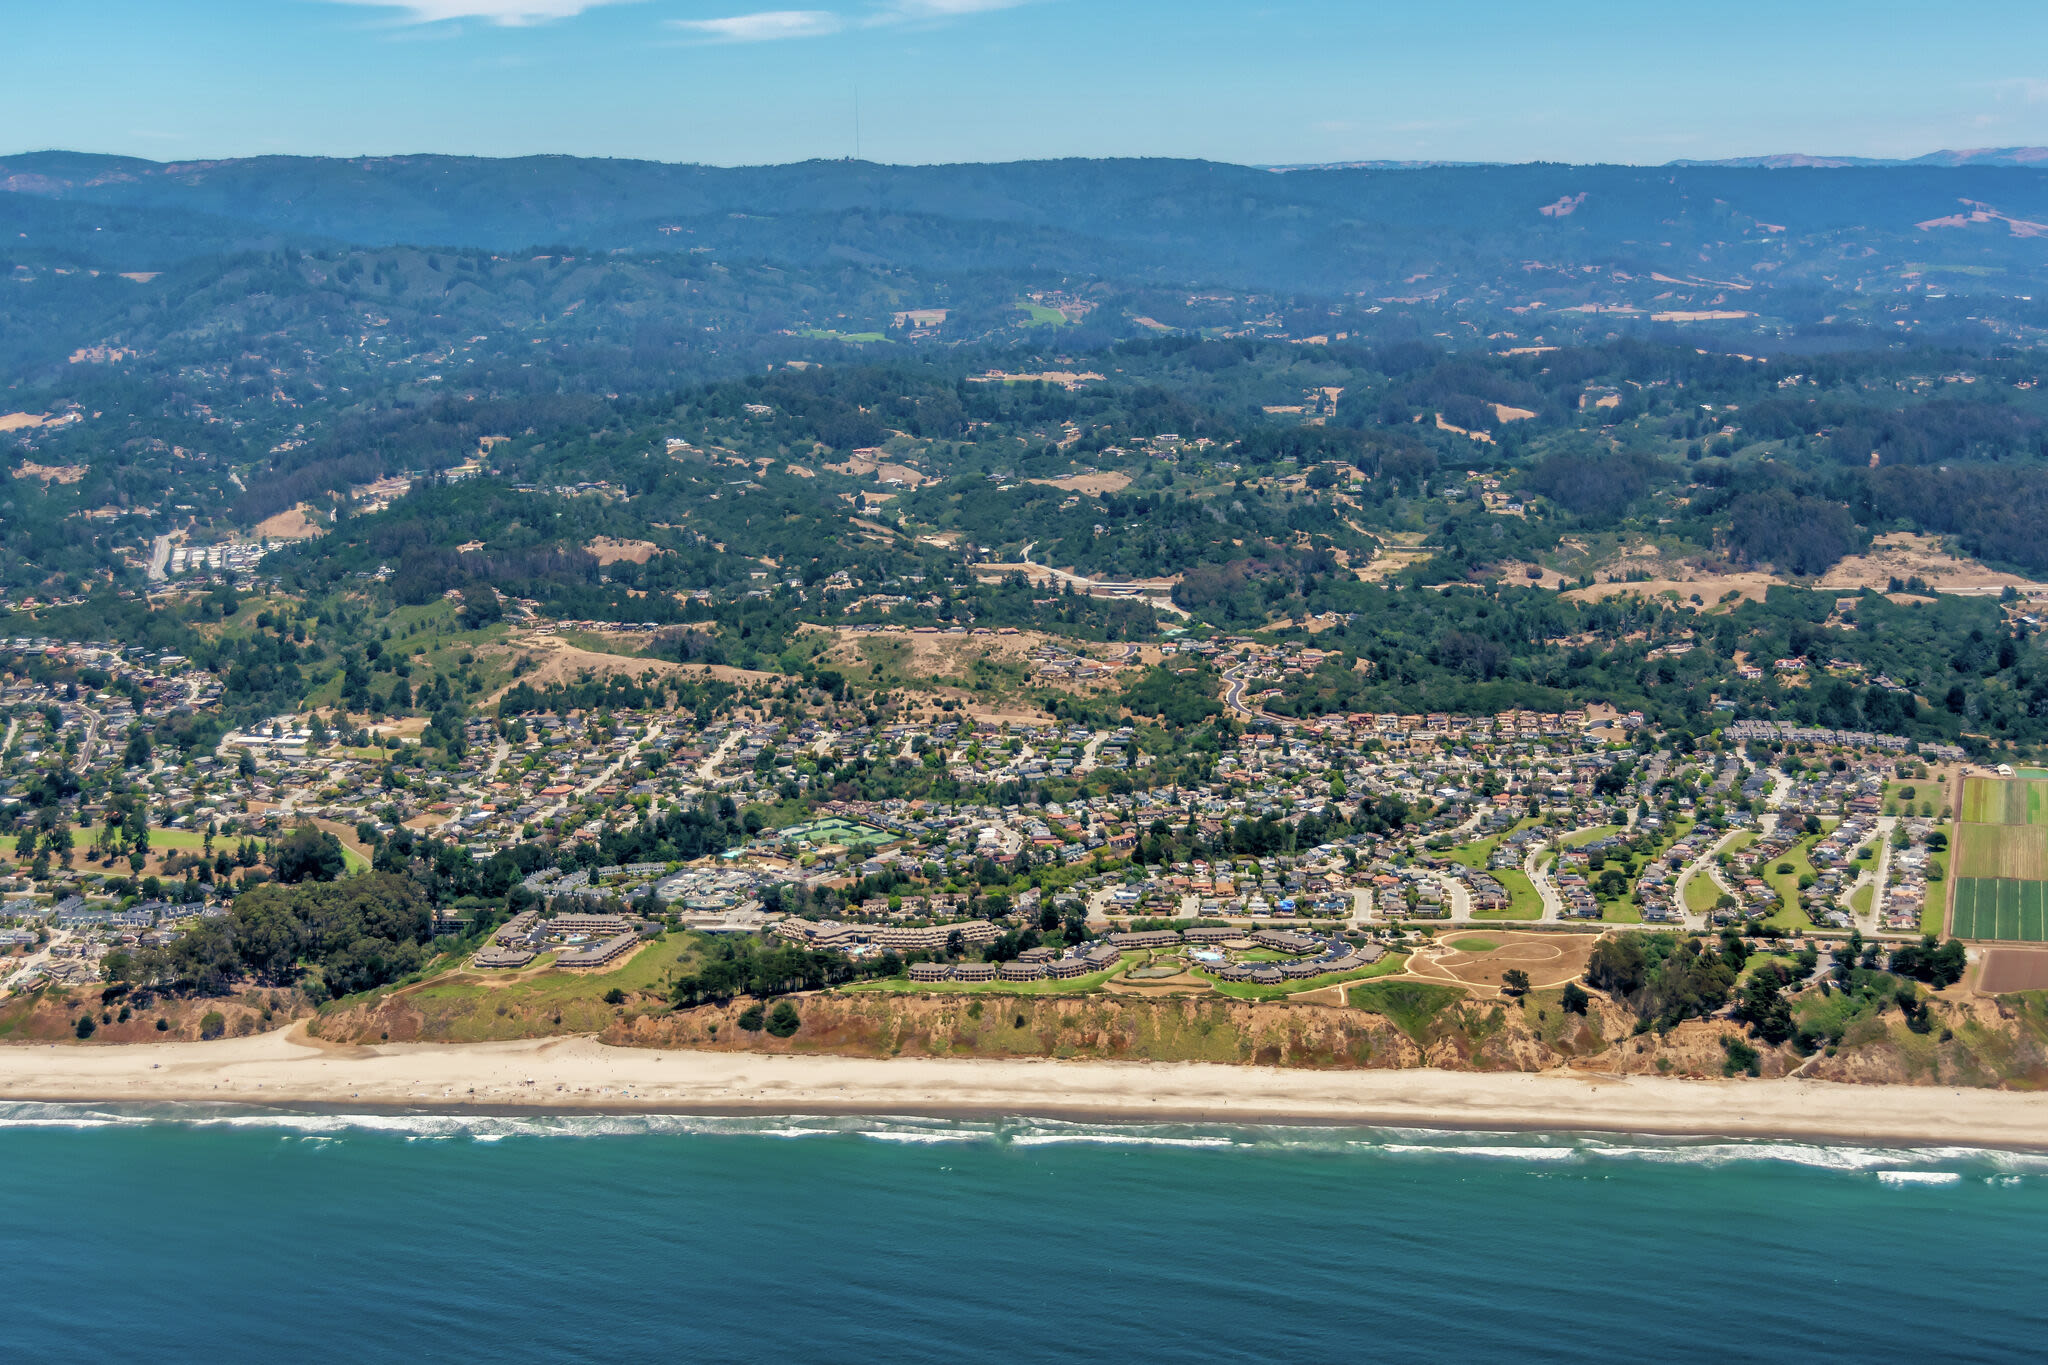 Aptos is world famous, but nobody in the Calif. town knows why